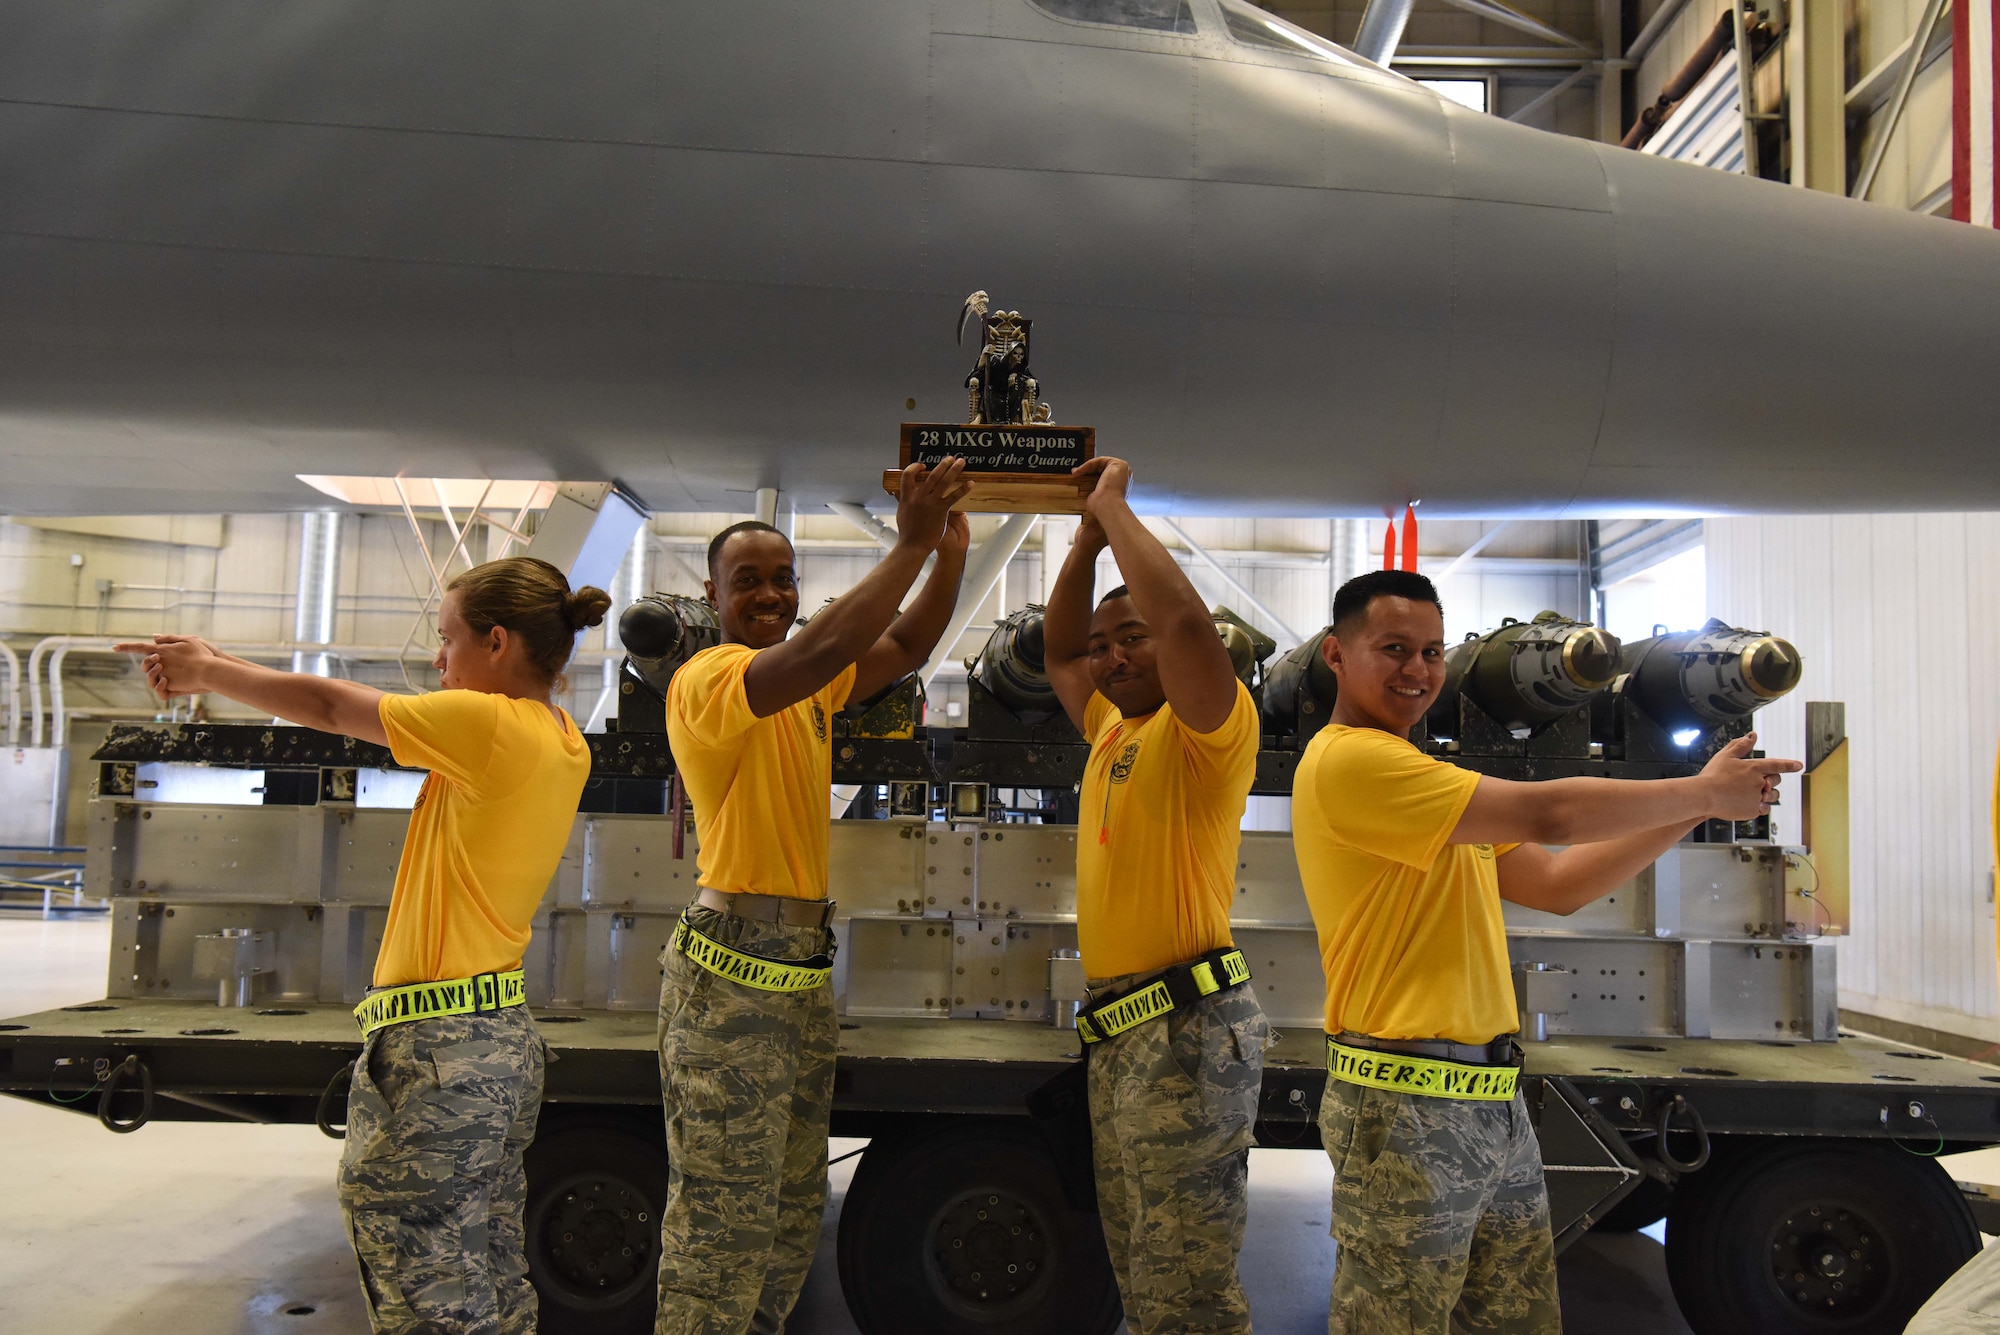 Members from the 37th Aircraft Maintenance Unit hold a trophy in the Load Crew Training Facility after winning a load competition at Ellsworth Air Force Base, S.D., July 13, 2018. Two teams of four competed to see who the best AMU of the quarter was by seeing who could load bombs the fastest and with the fewest errors. (U.S Air Force photo by Airman 1st Class Thomas Karol)